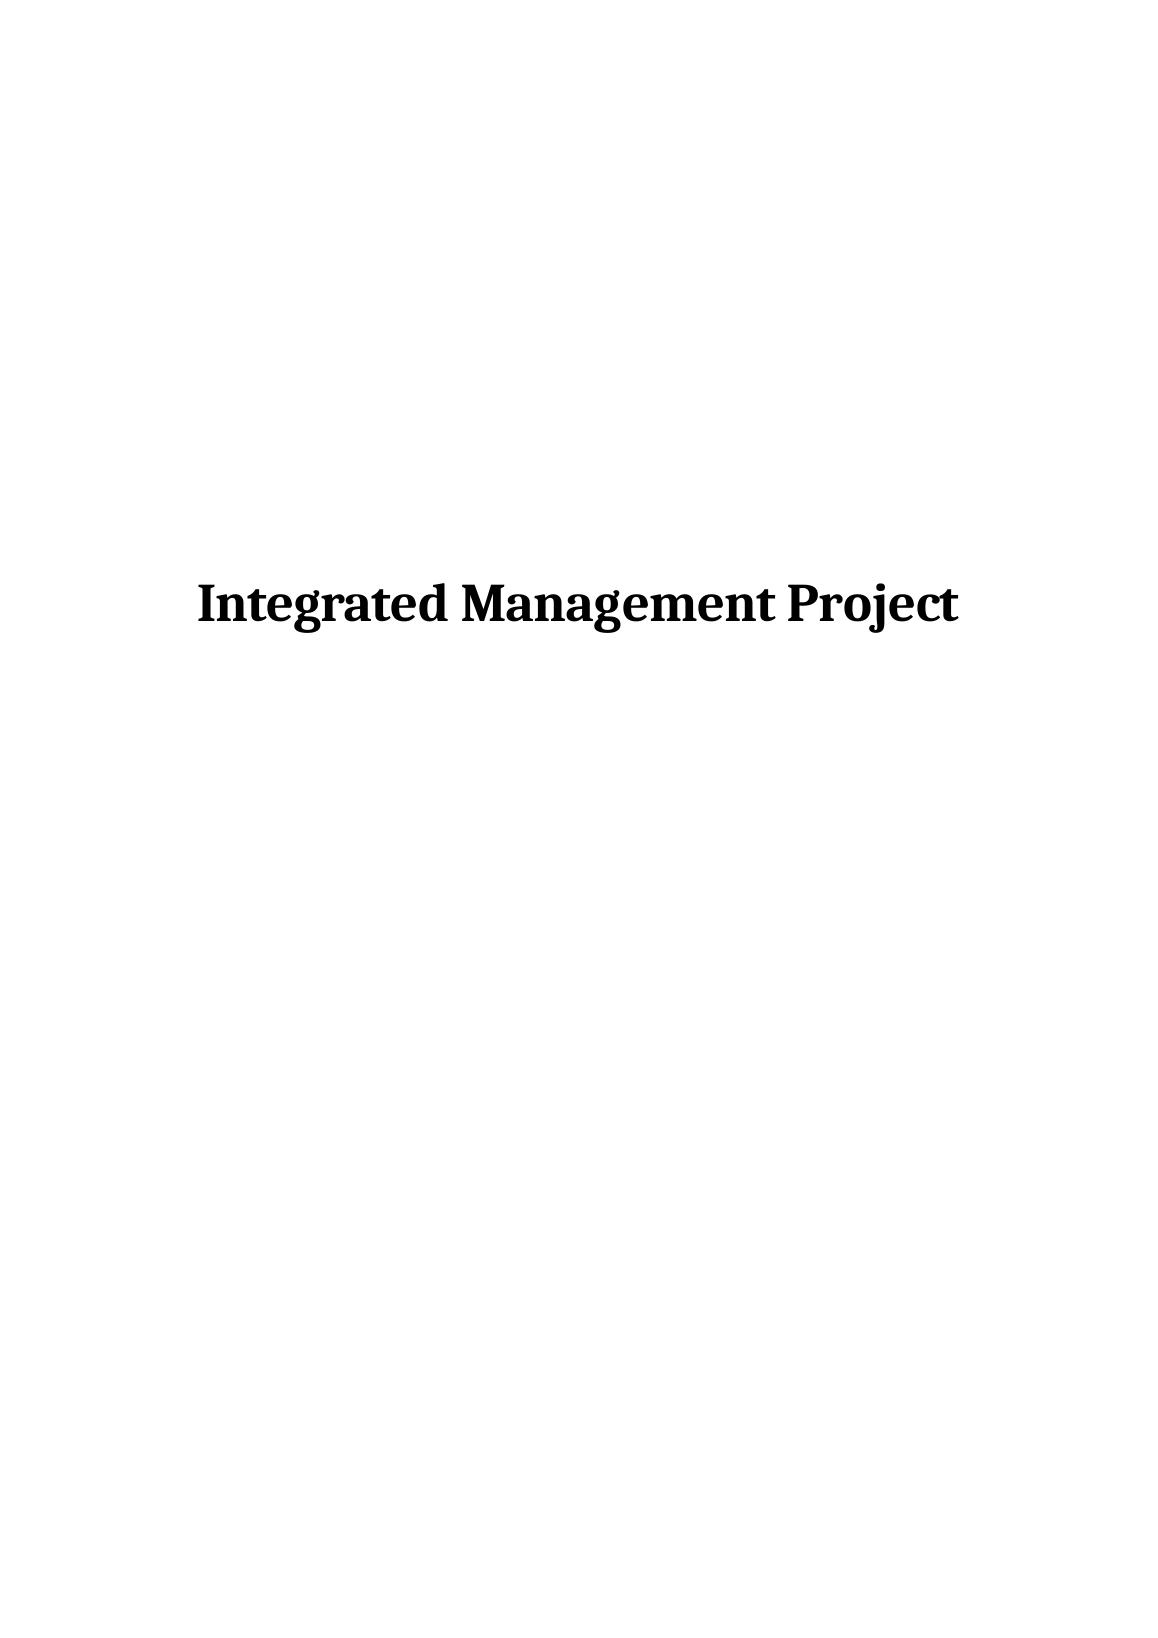 Integrated Management Project Contents_1